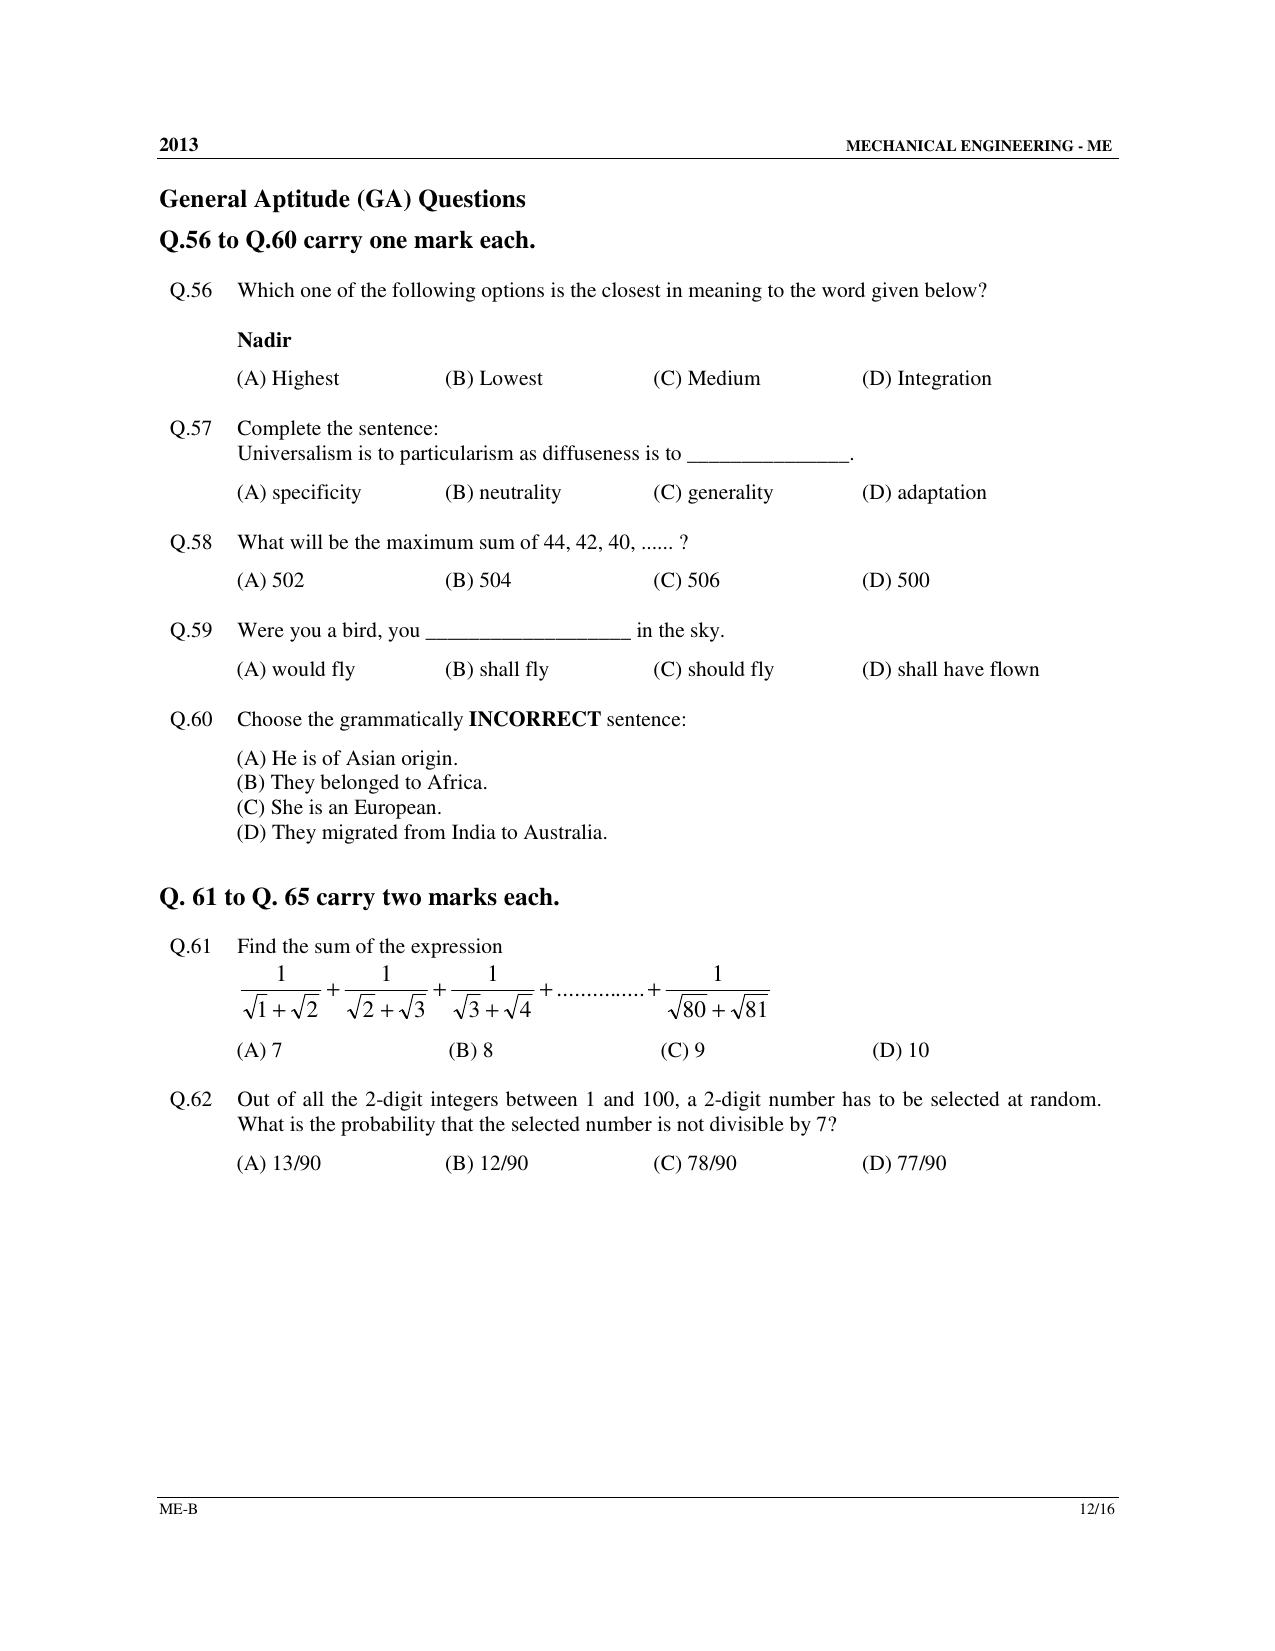 GATE 2013 Mechanical Engineering (ME) Question Paper with Answer Key - Page 27